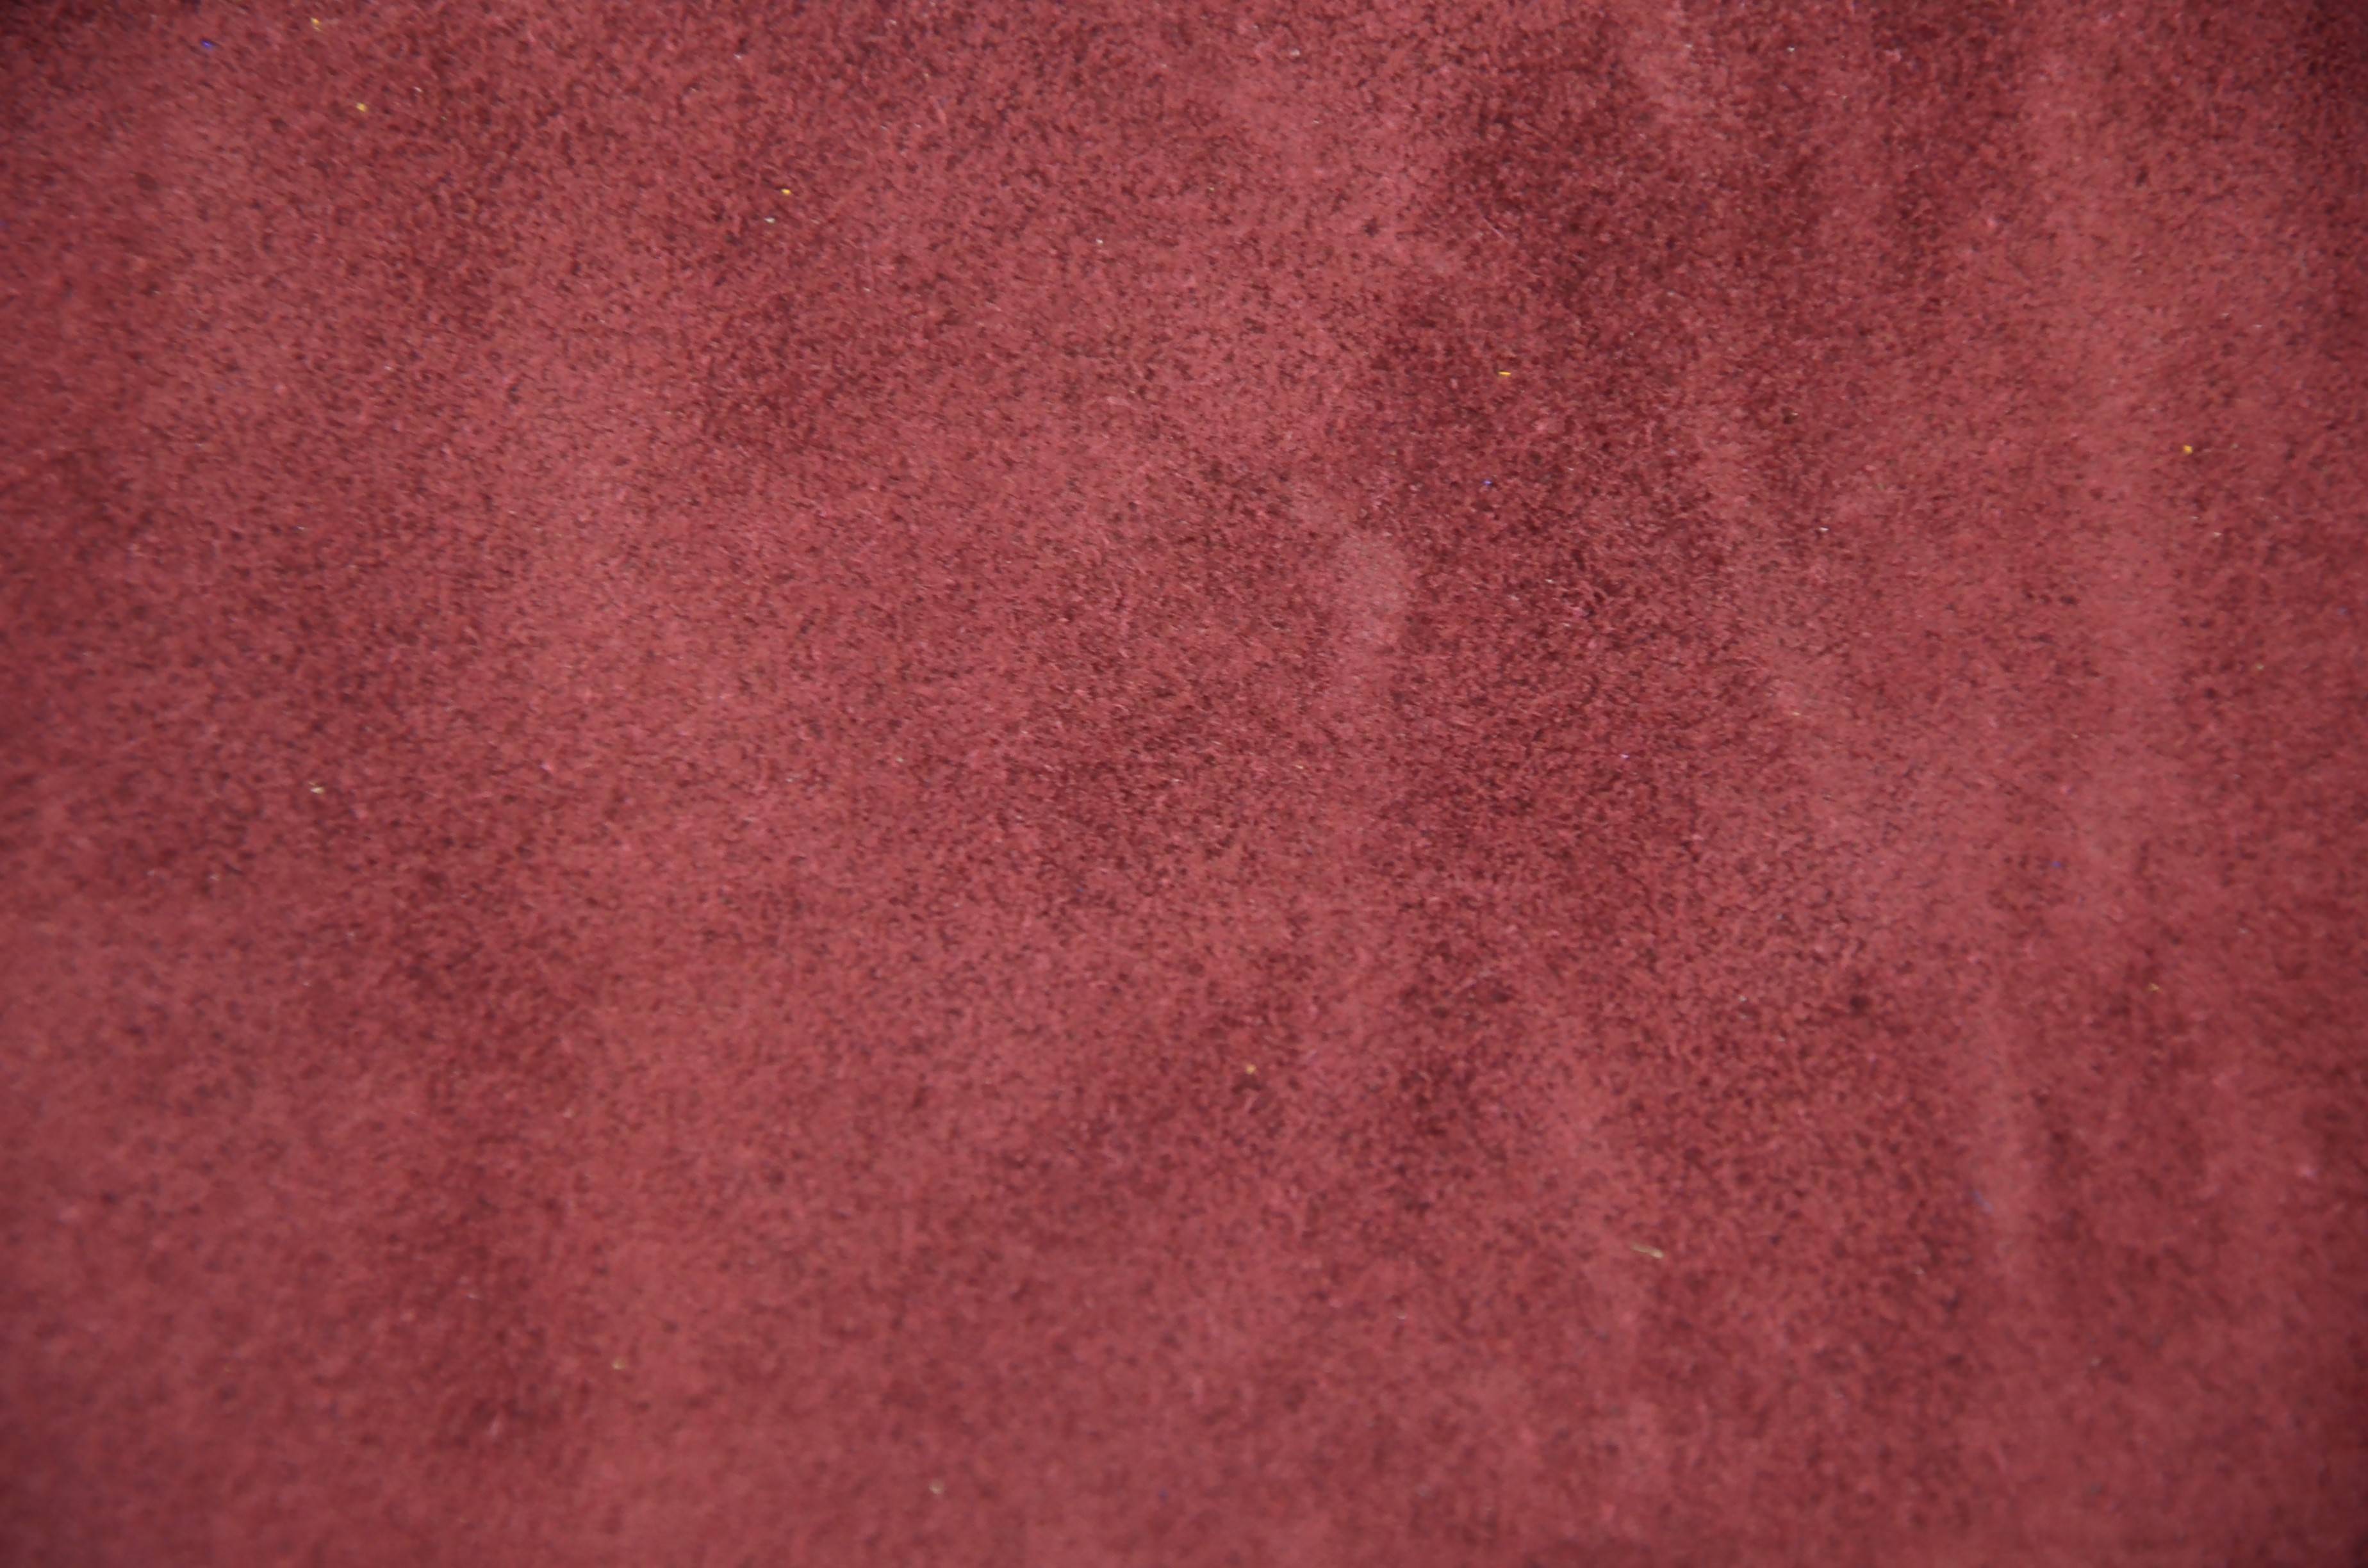 Maroon Color Backgrounds